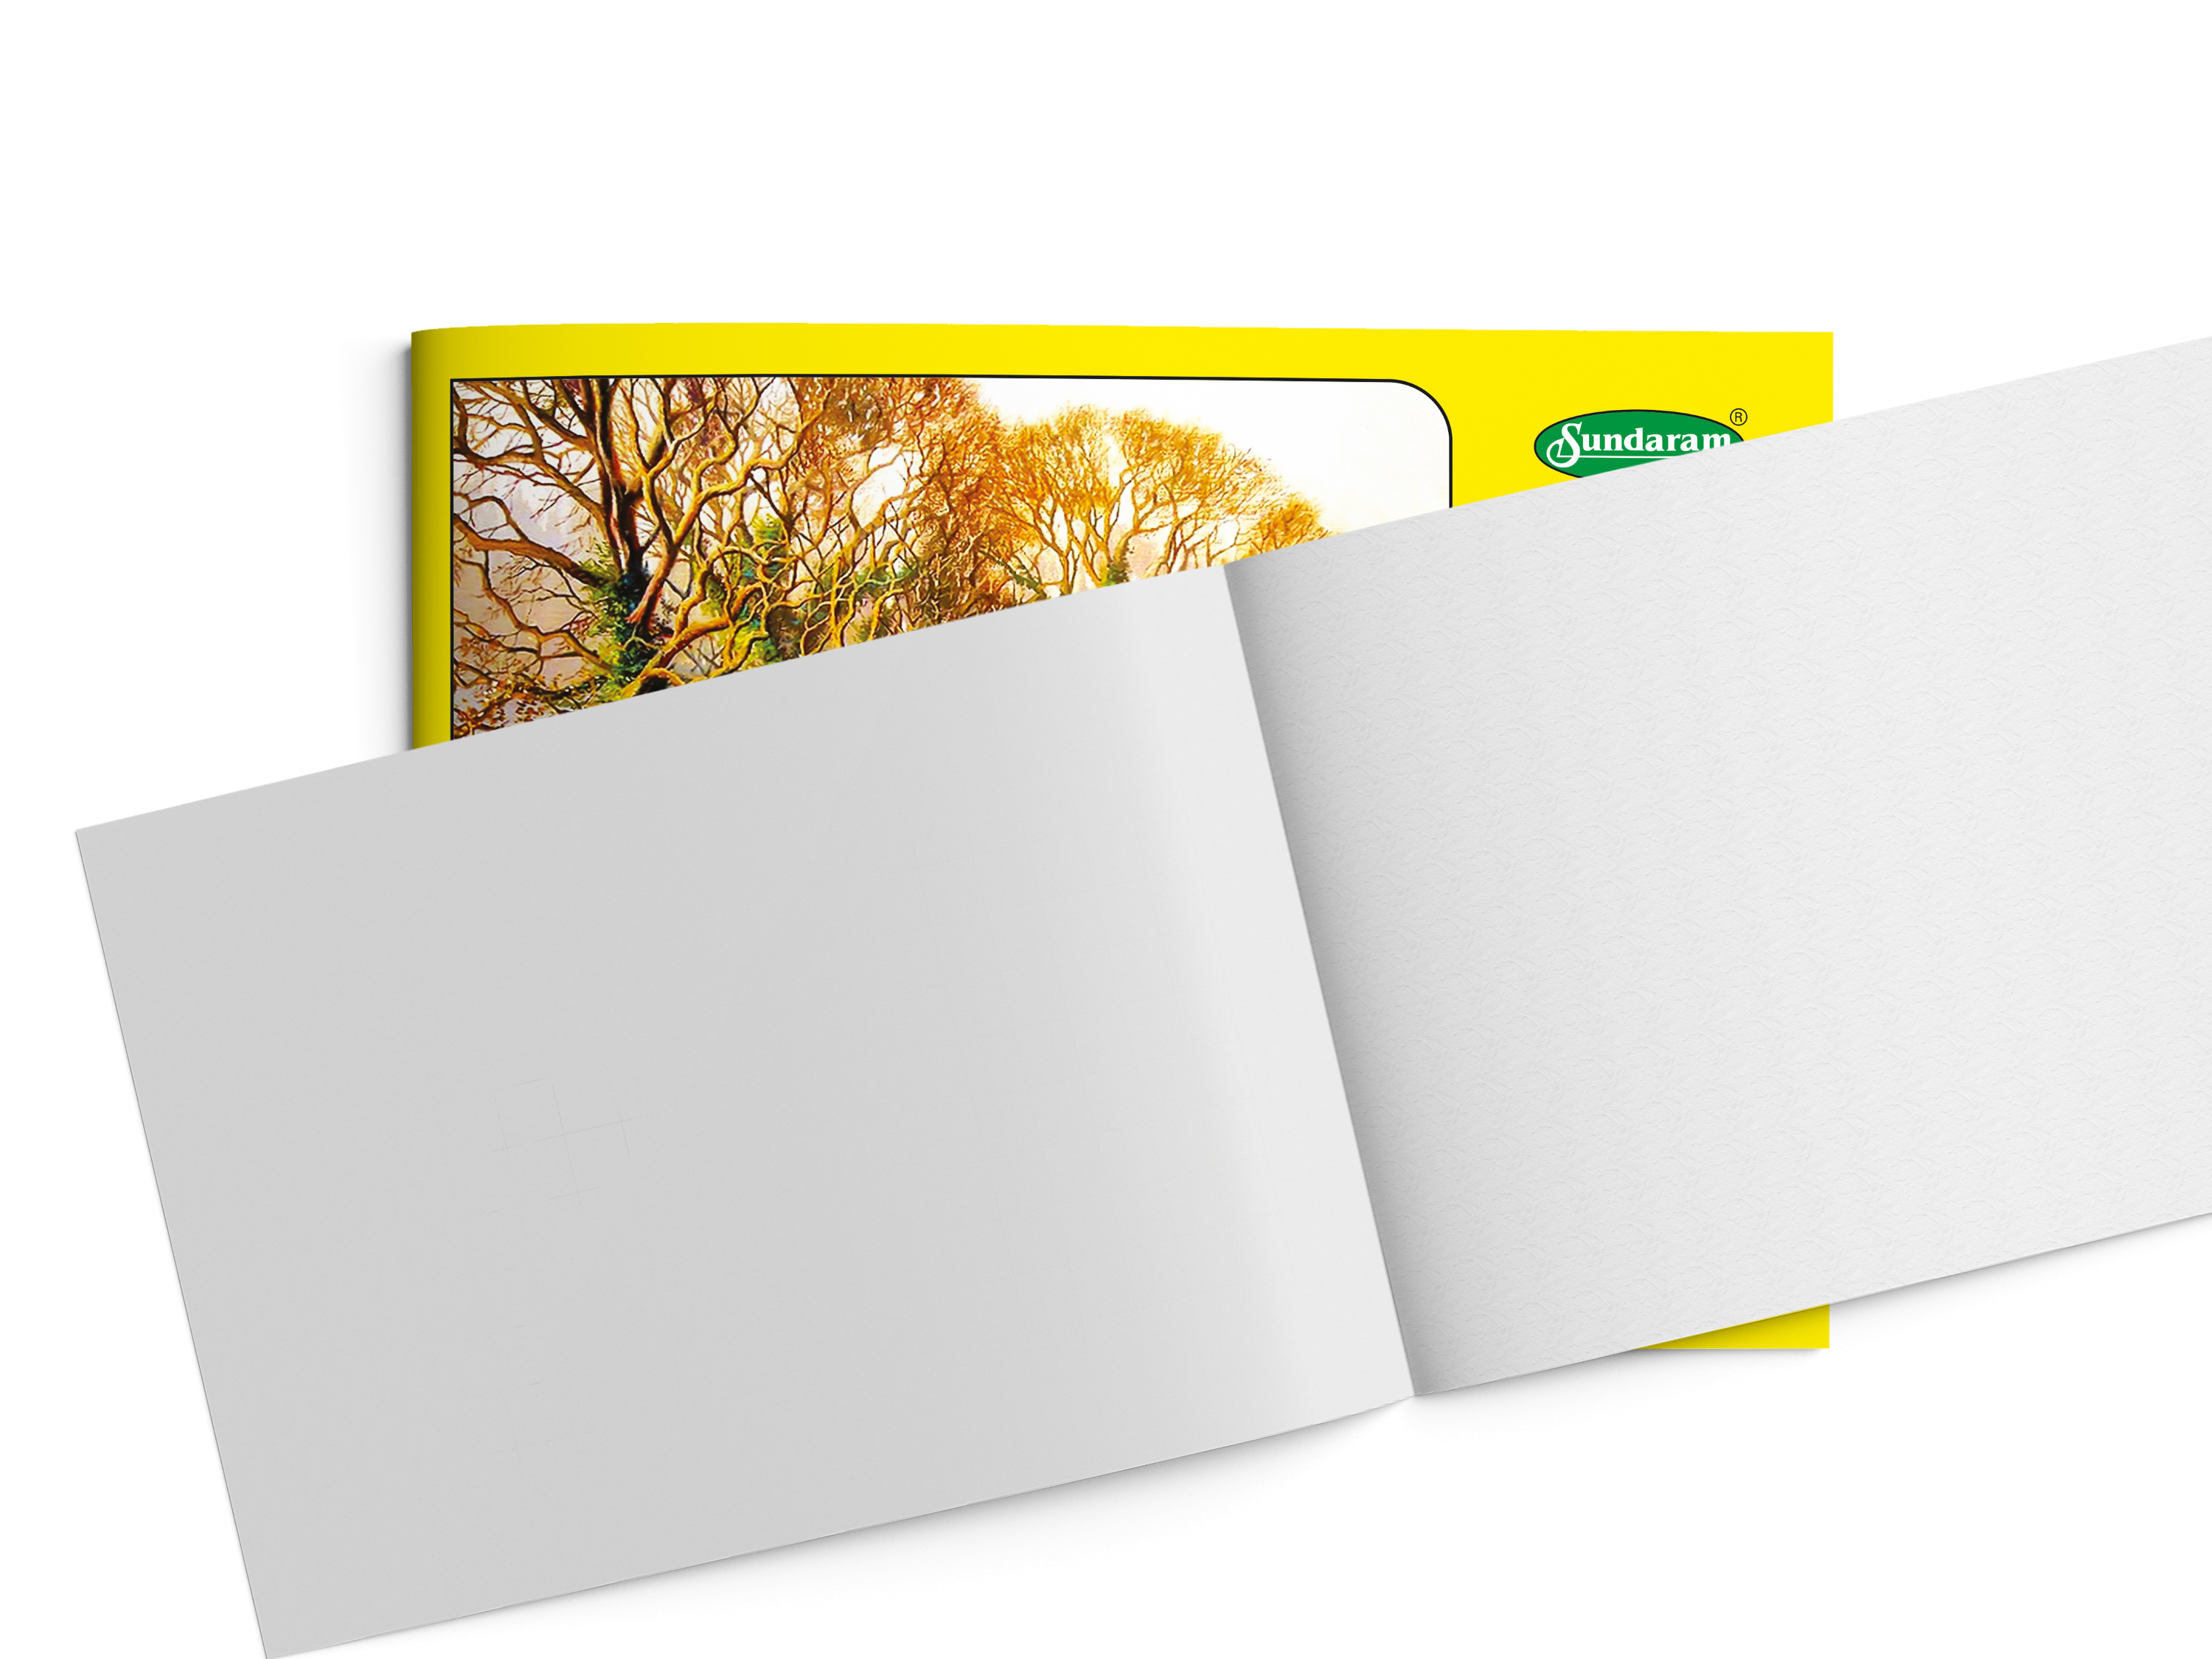 Sundaram Drawing Book - 3A Jumbo (Yellow) - 36 Pages (D-4) Wholesale Pack - 336 Units